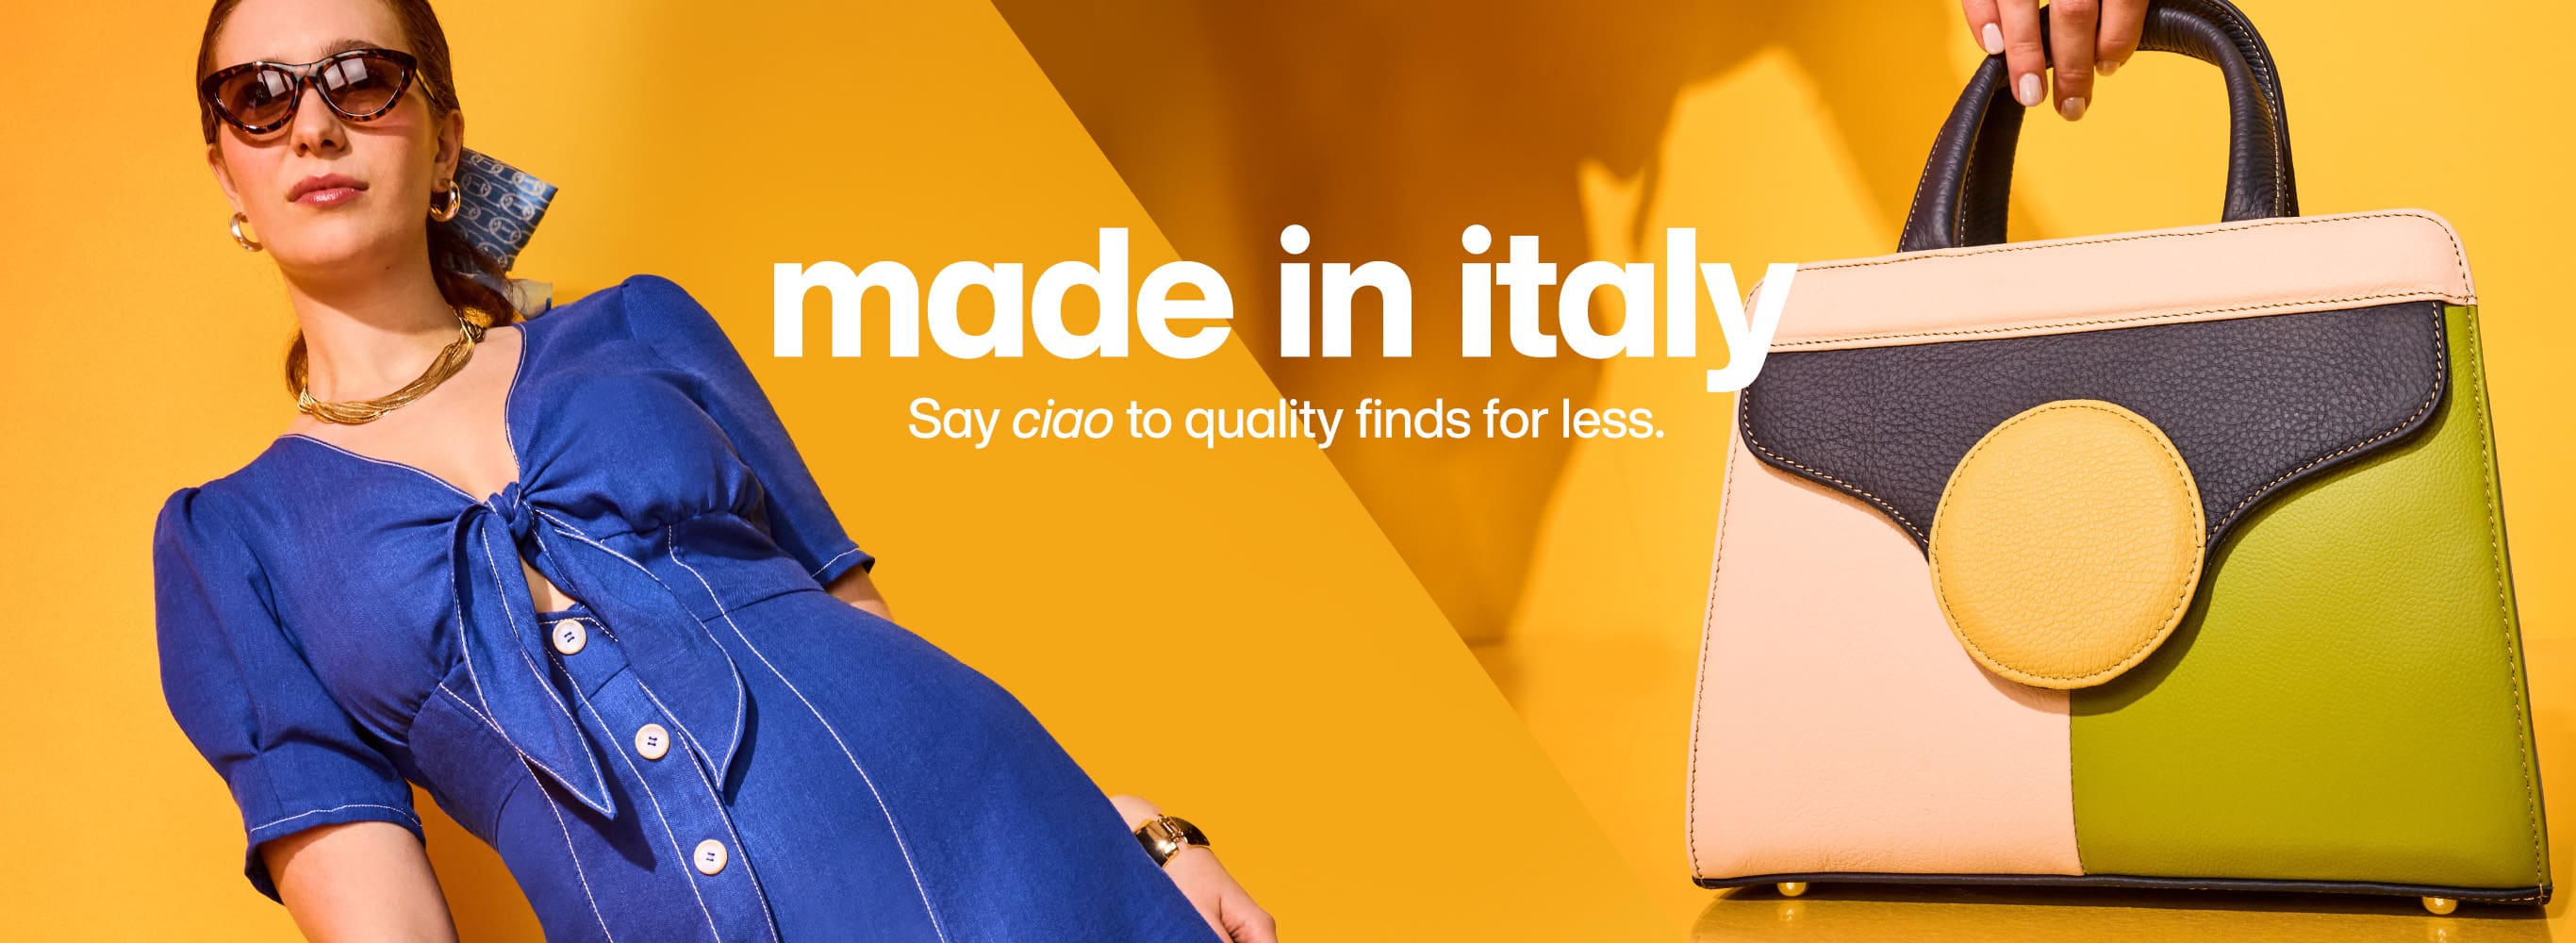 Made in Italy. Say ciao quality finds for less.